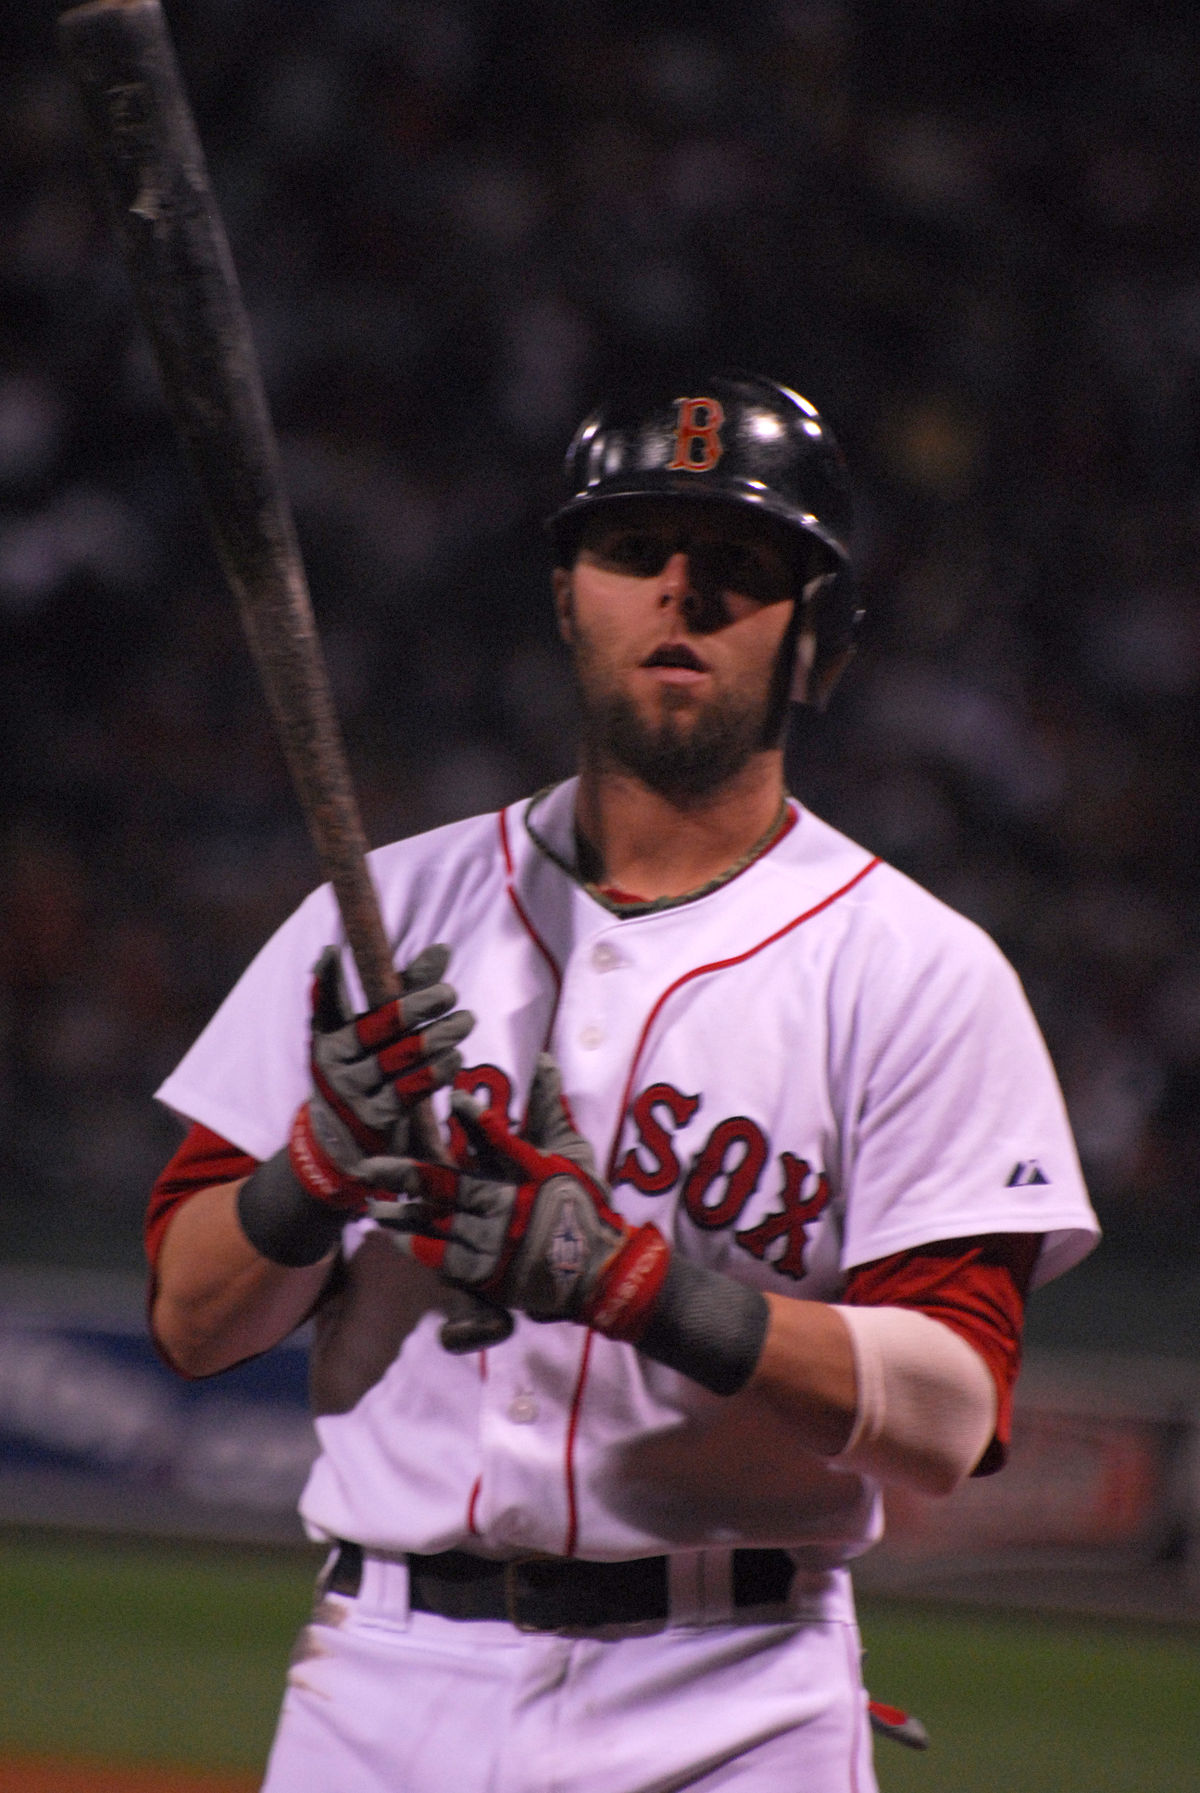 Dustin Pedroia not yet thinking about Boston Red Sox comeback in